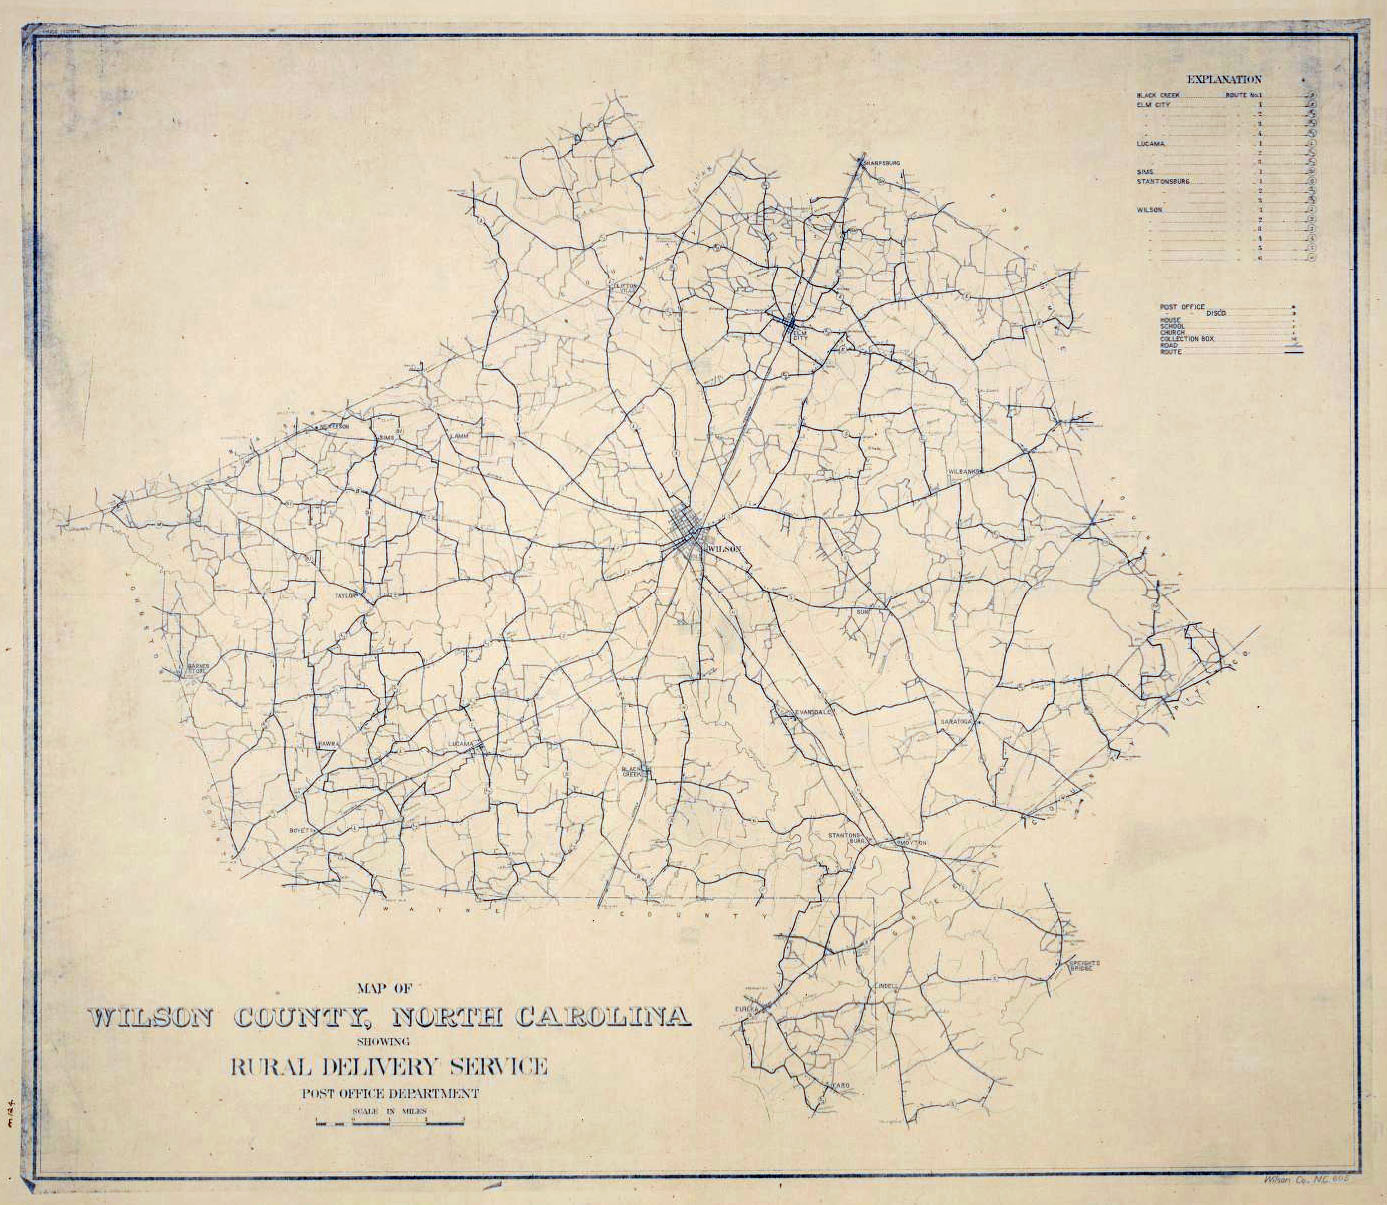 Map of Wilson County, North Carolina, showing rural delivery service 